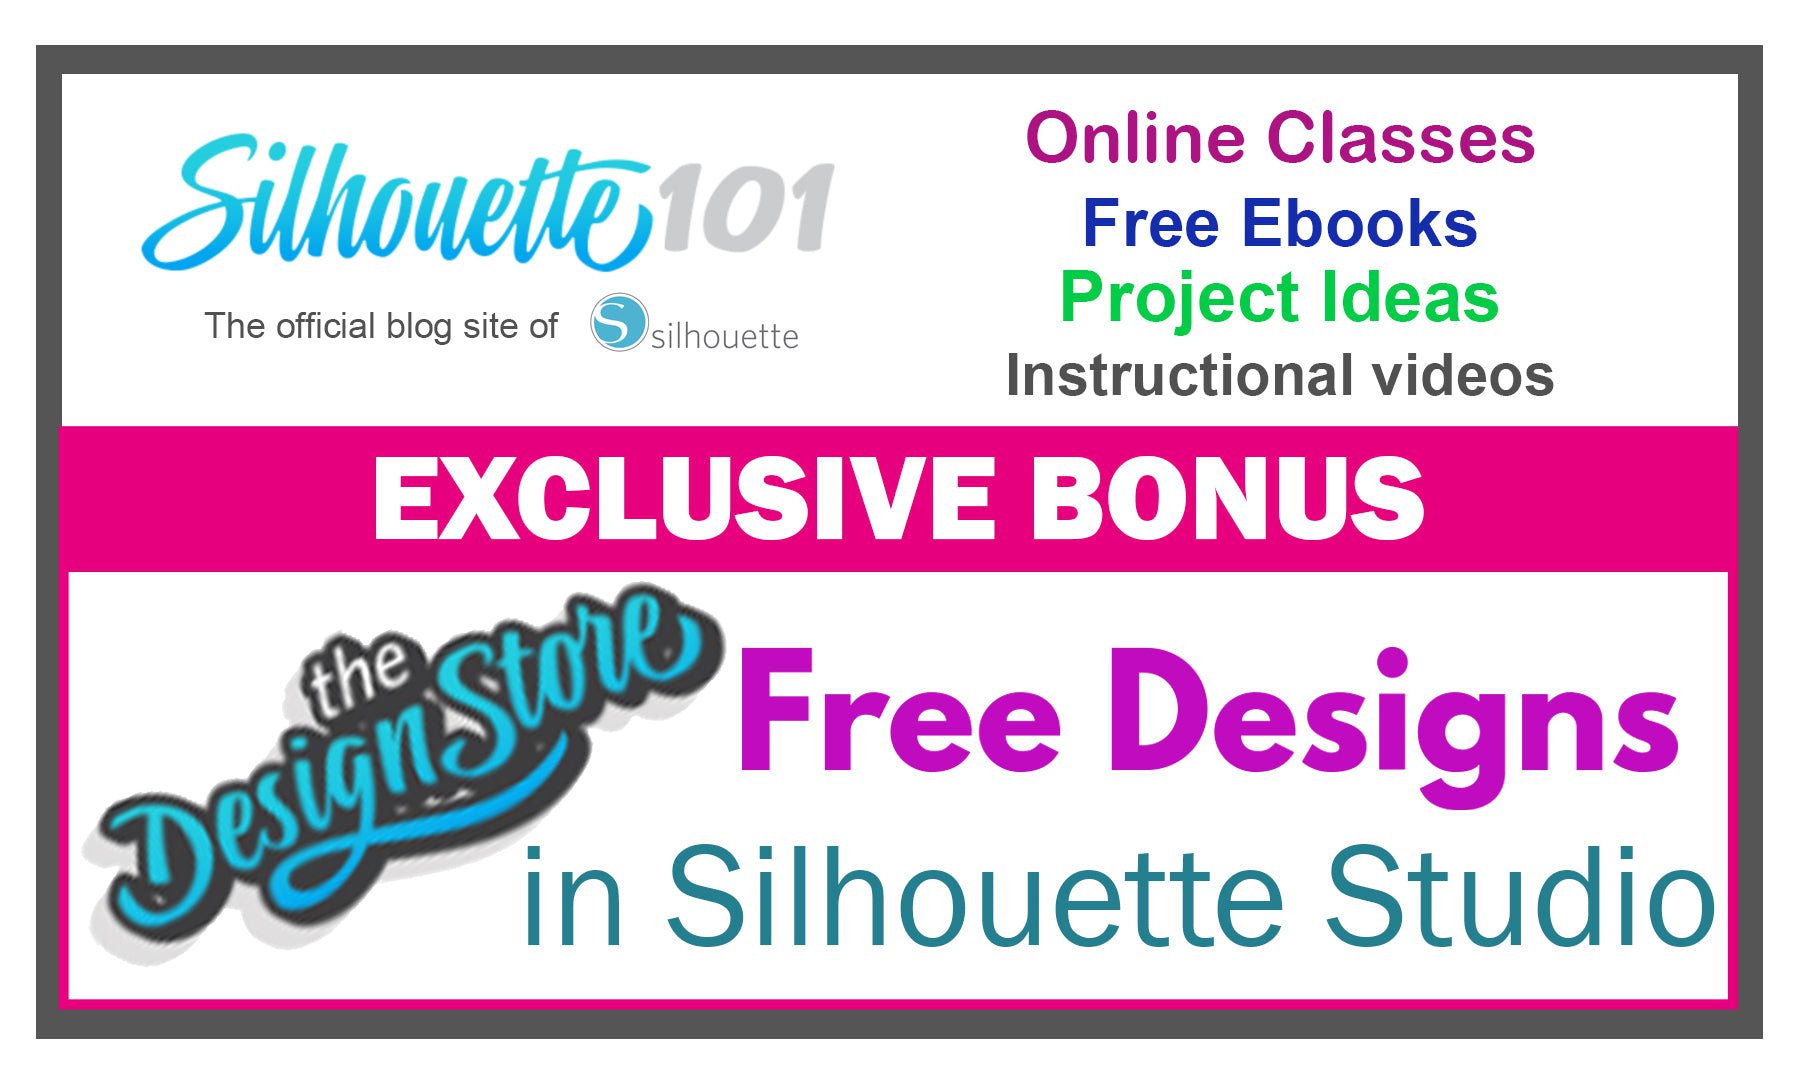 Silhouette Cameo 4 Plus Bundle with 2 Autoblades, 3 Different Cutting Mats, CC Vinyl Tool Kit, 100 Designs, and Access to Ebooks, Classes and More